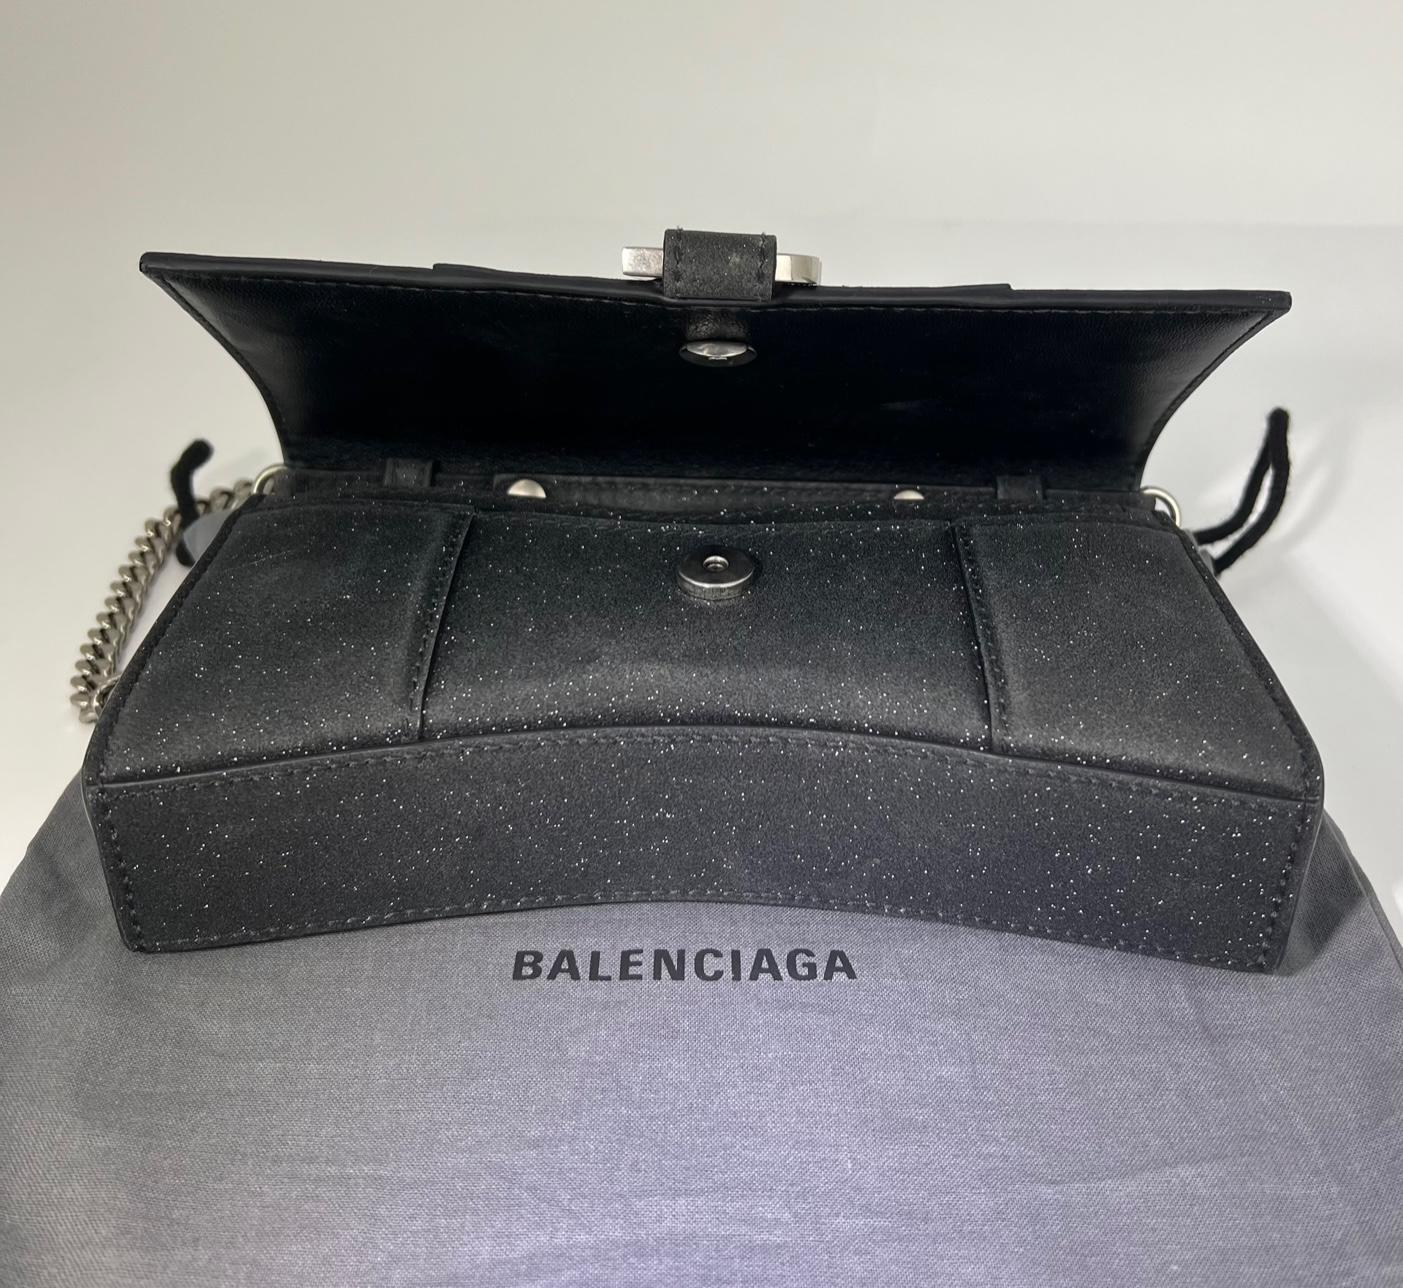 Pre-Owned  100% Authentic
BALENCIAGA Hourglass Wallet On Chain Black Glitter
THIS IS NOT THE XS (its bigger)
RATING: A/B...Very Good, well maintained, 
shows minor signs of wear
MATERIAL: glitter fabric, leather
STRAP: adjustable, removable chain